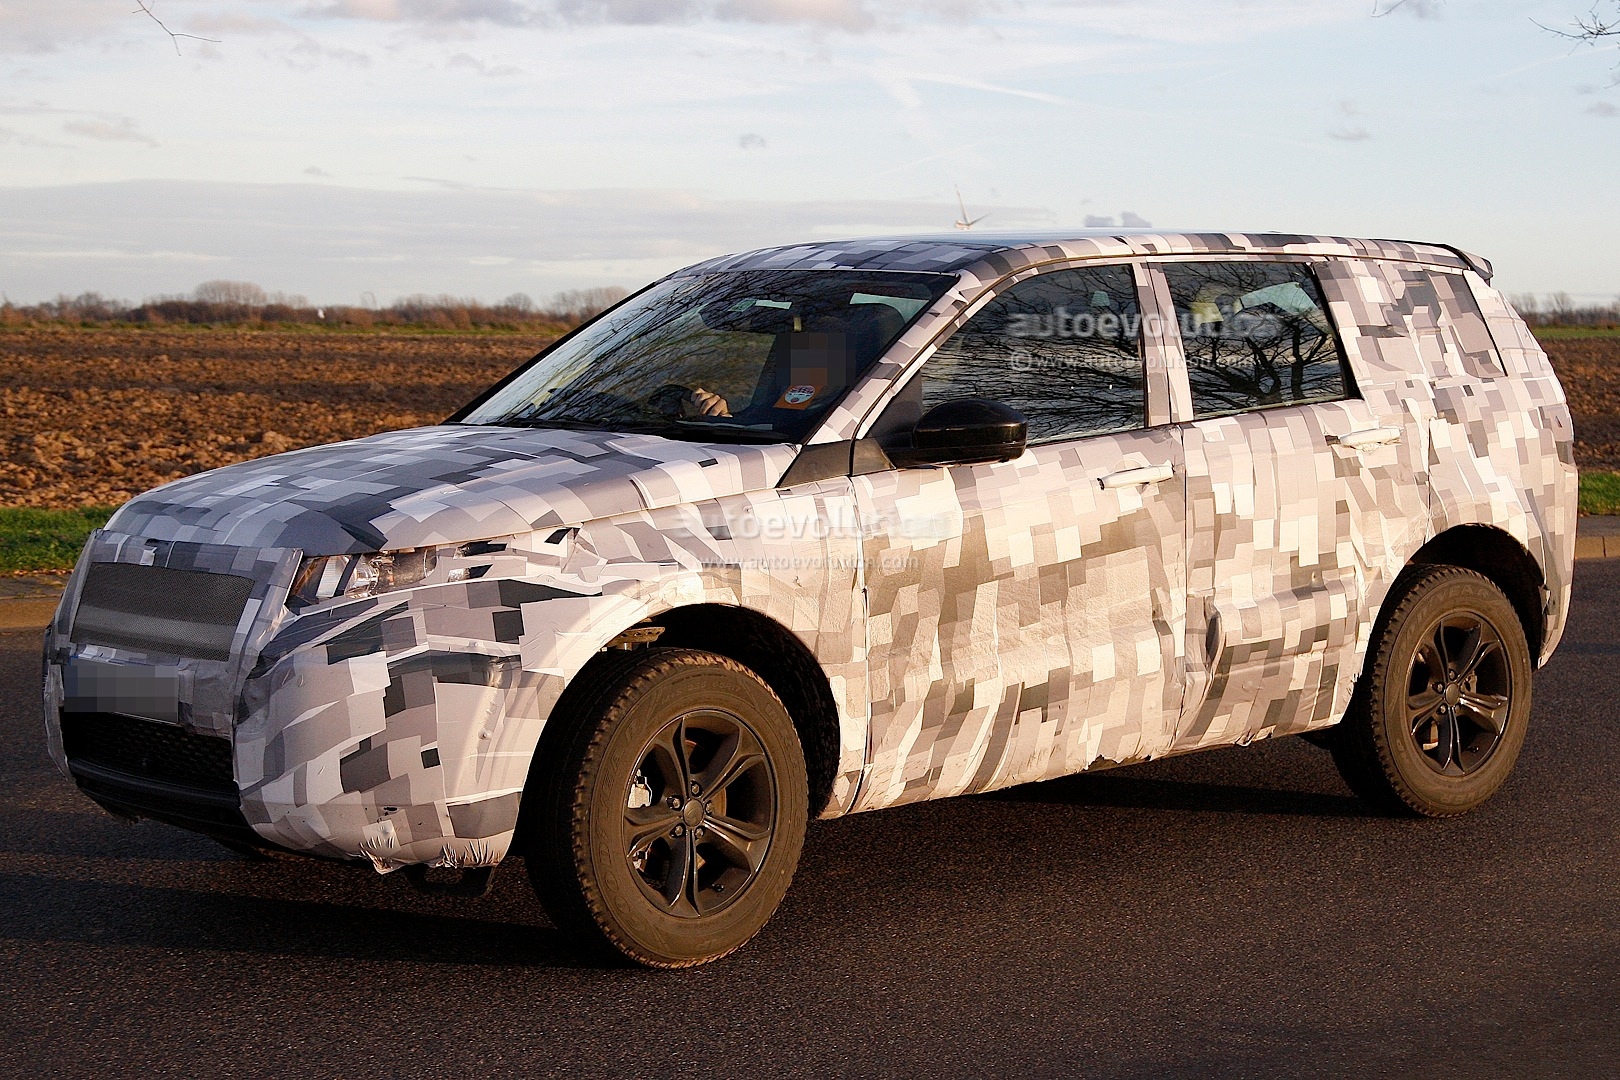 2015 Land Rover Freelander Replacement Spied With Range | Auto Design ...